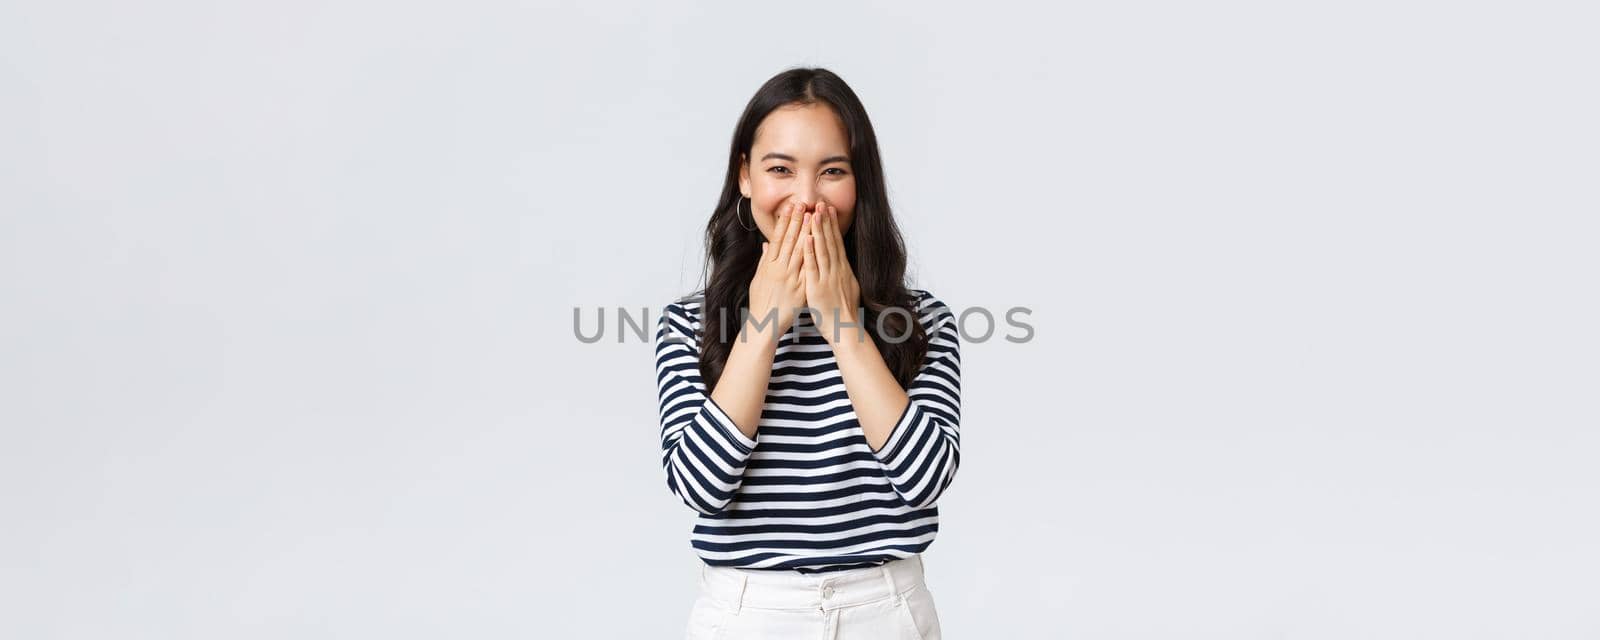 Lifestyle, people emotions and casual concept. Cute silly asian female giggle while gossiping and mocking someone, cover mouth as smiling and laughing carefree.